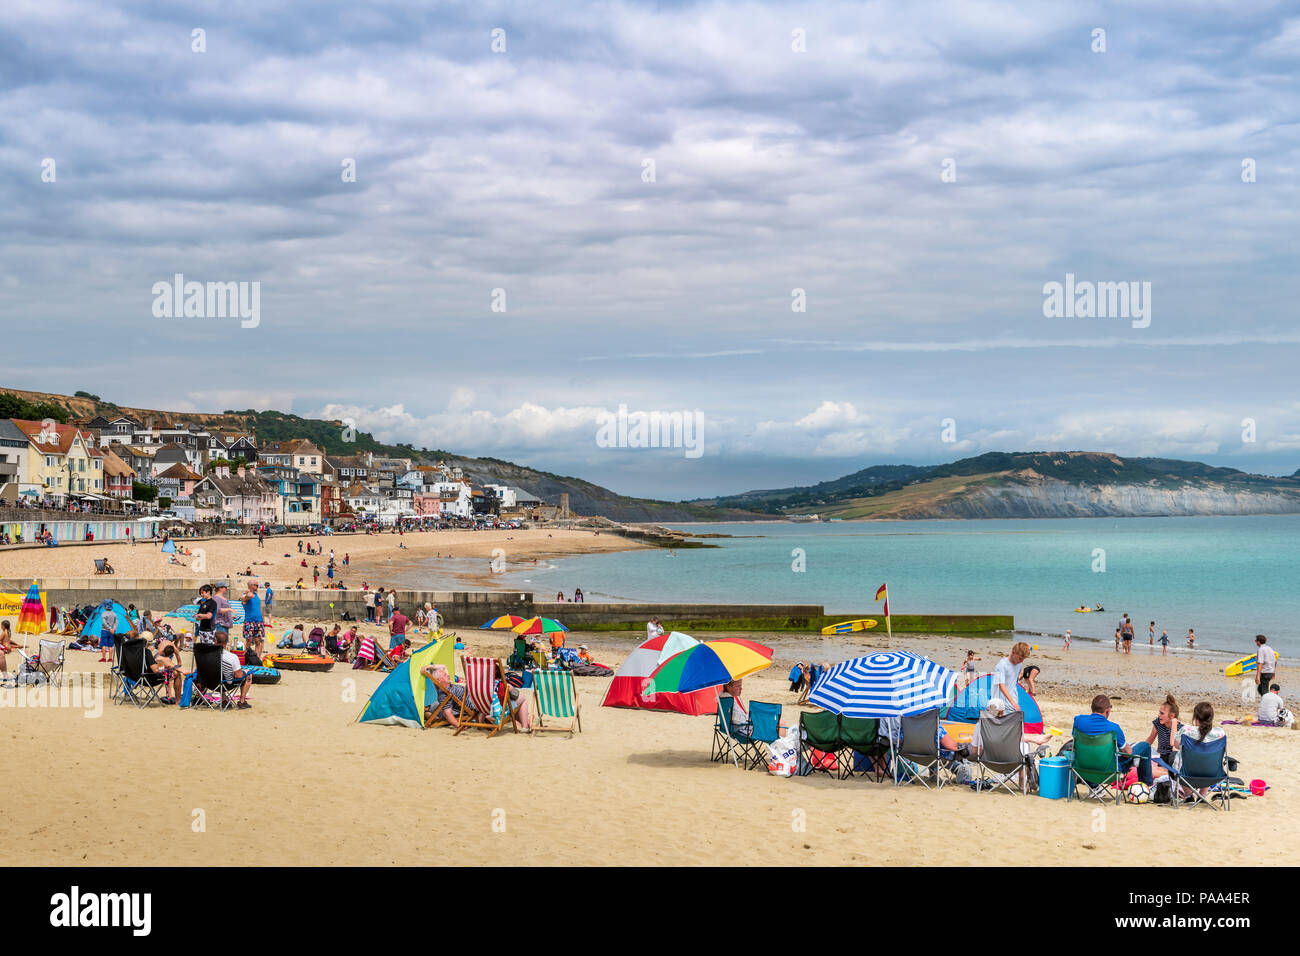 UK Weather - As the good weather continues in the south west of England, holidaymakers enjoy a warm day on the beach at Lyme Regis in Dorset. Stock Photo